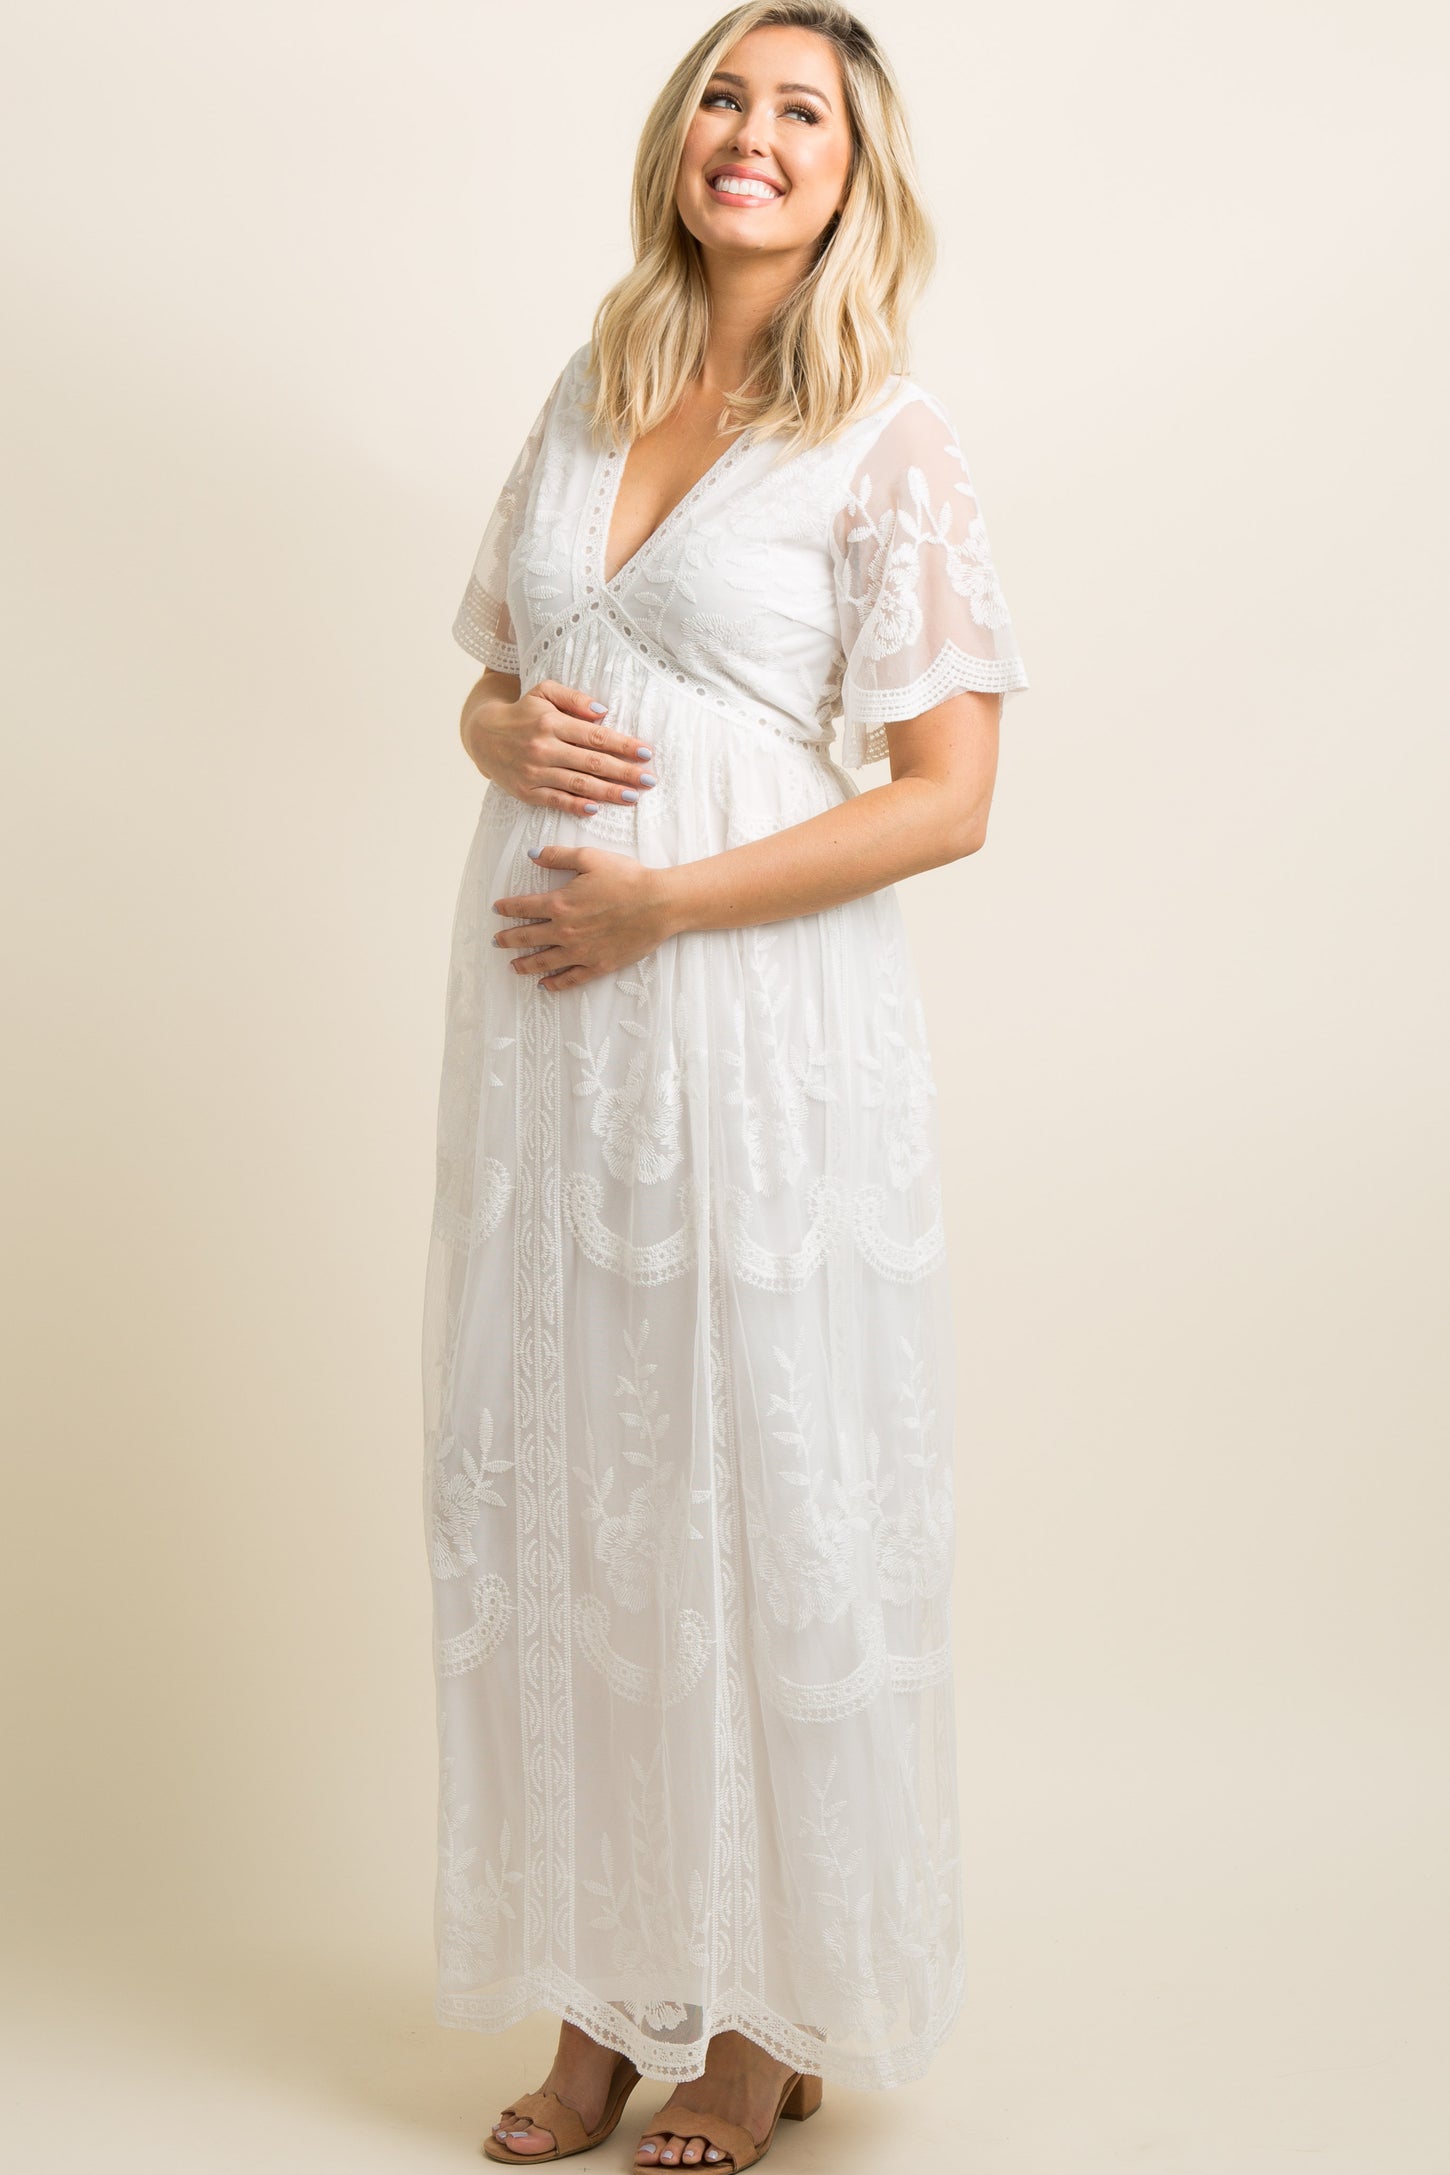 Maternity-dress, White Clear